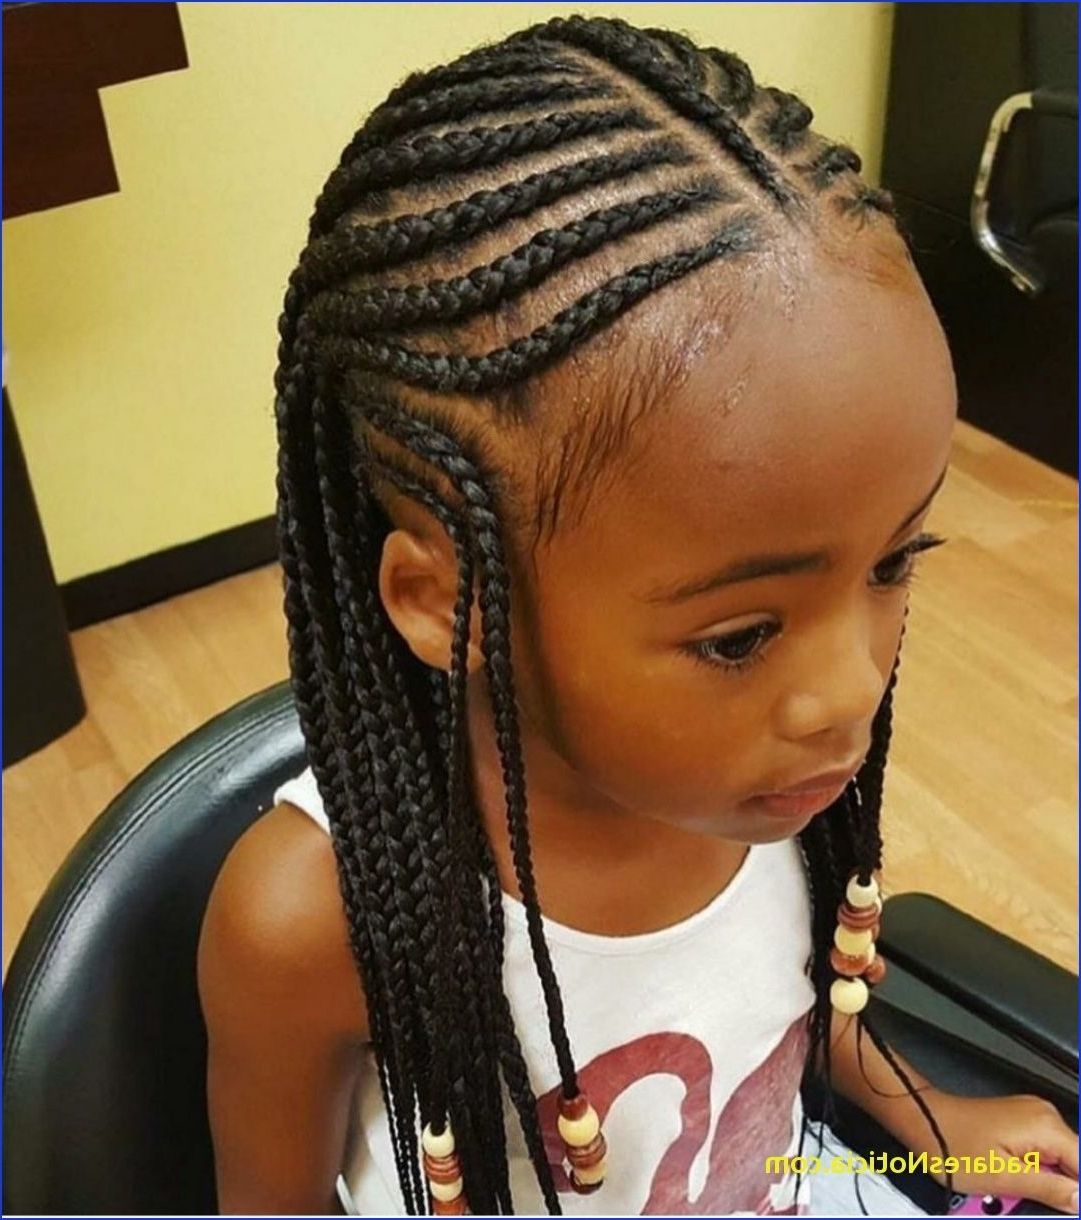 Well Liked Braided Hairstyles With Beads For Cute Braided Hairstyles 37 Doubts About Braid Hairstyles For Kids (View 5 of 15)